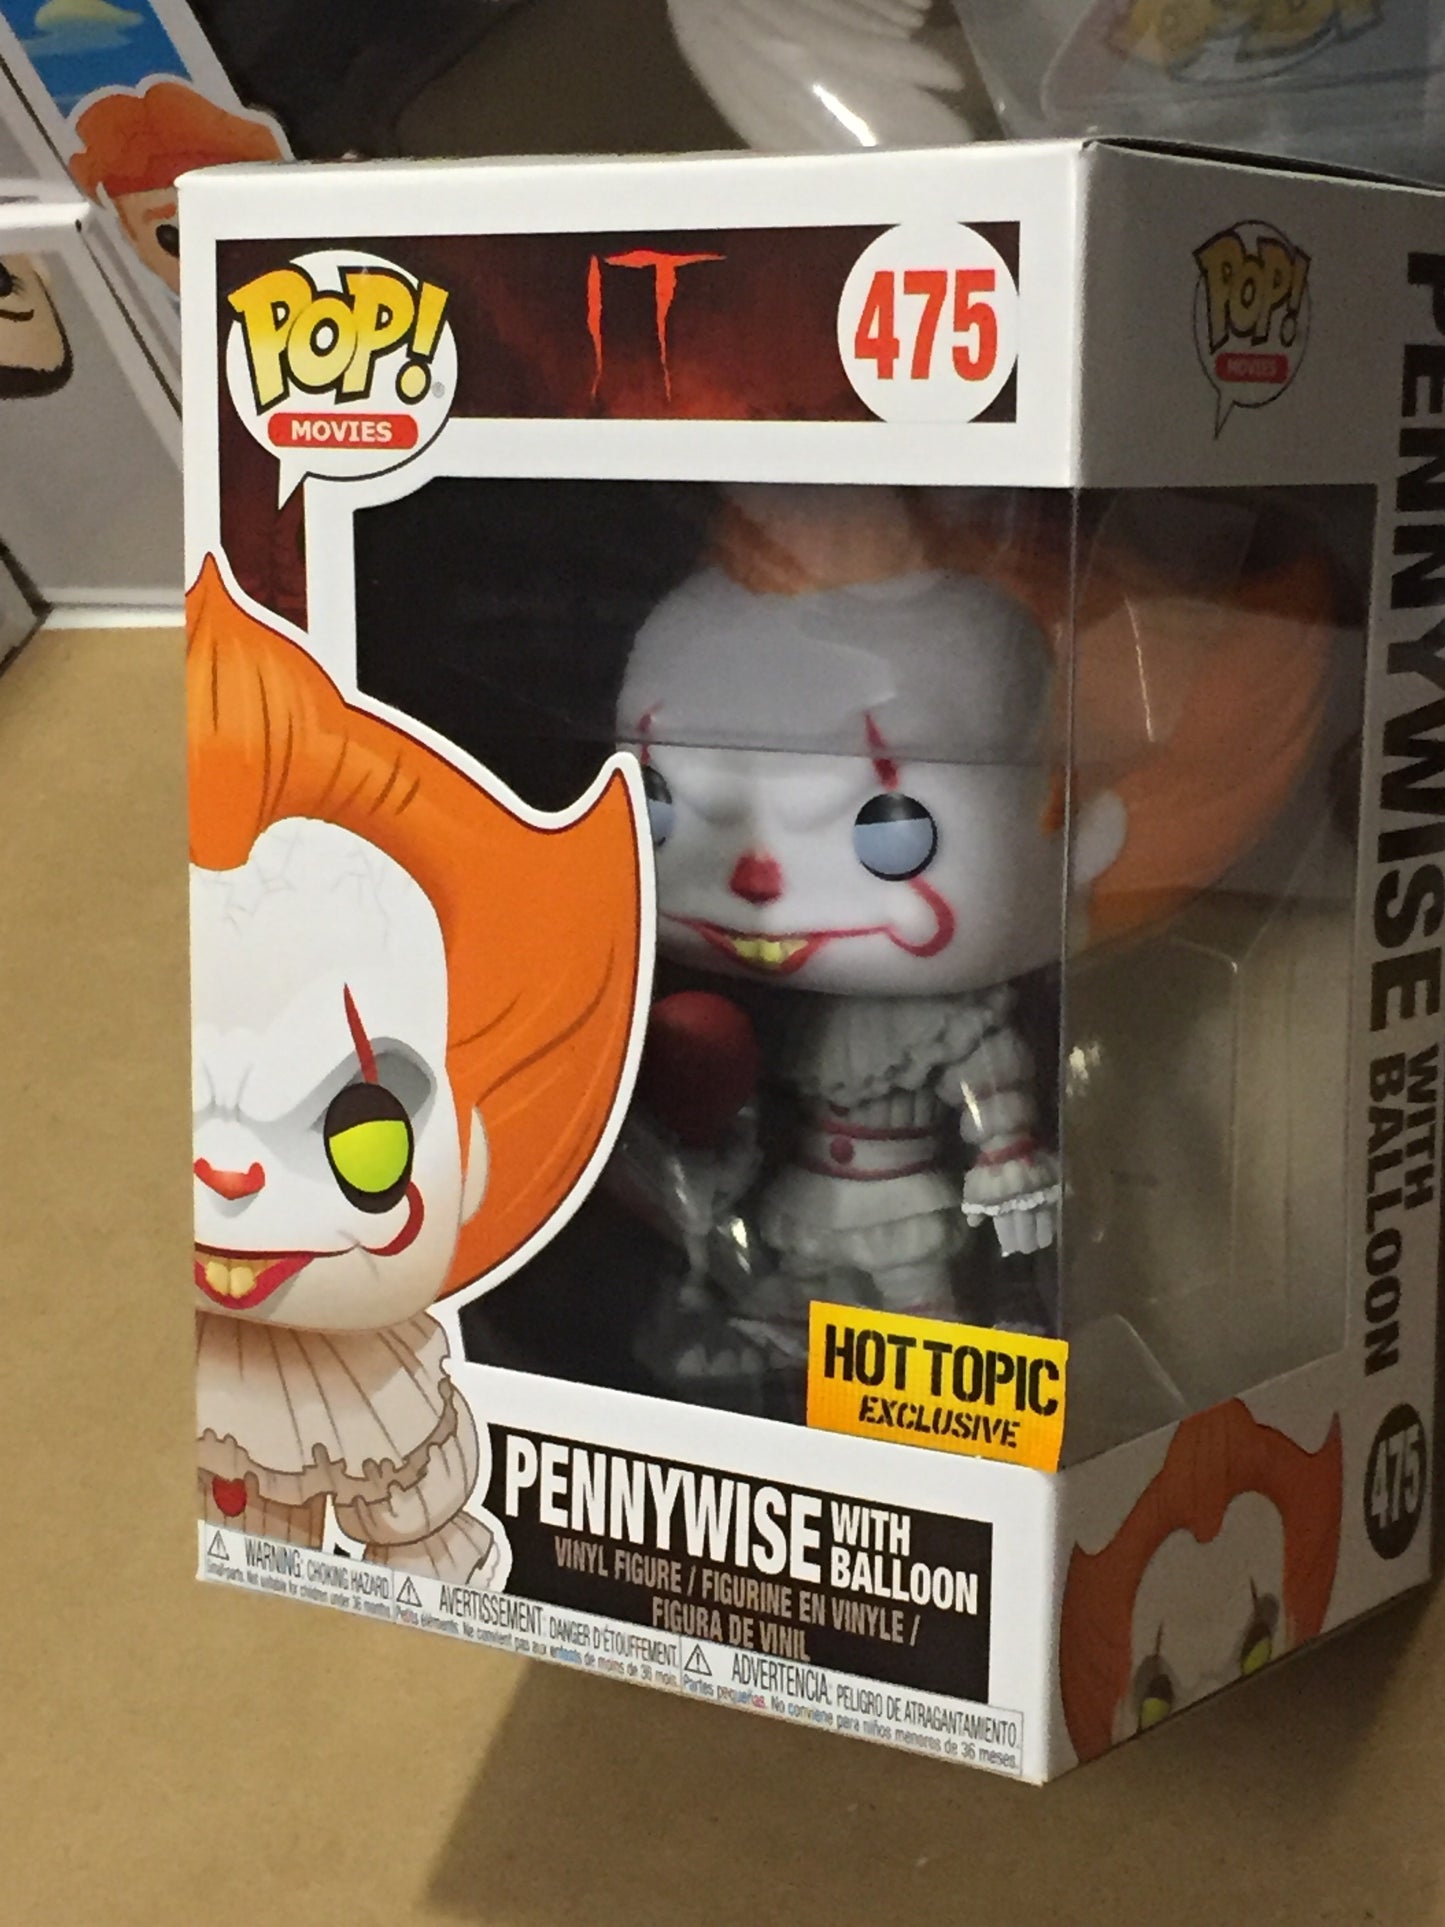 IT Pennywise with Balloon Exclusive 475 Funko Pop! vinyl figure movie